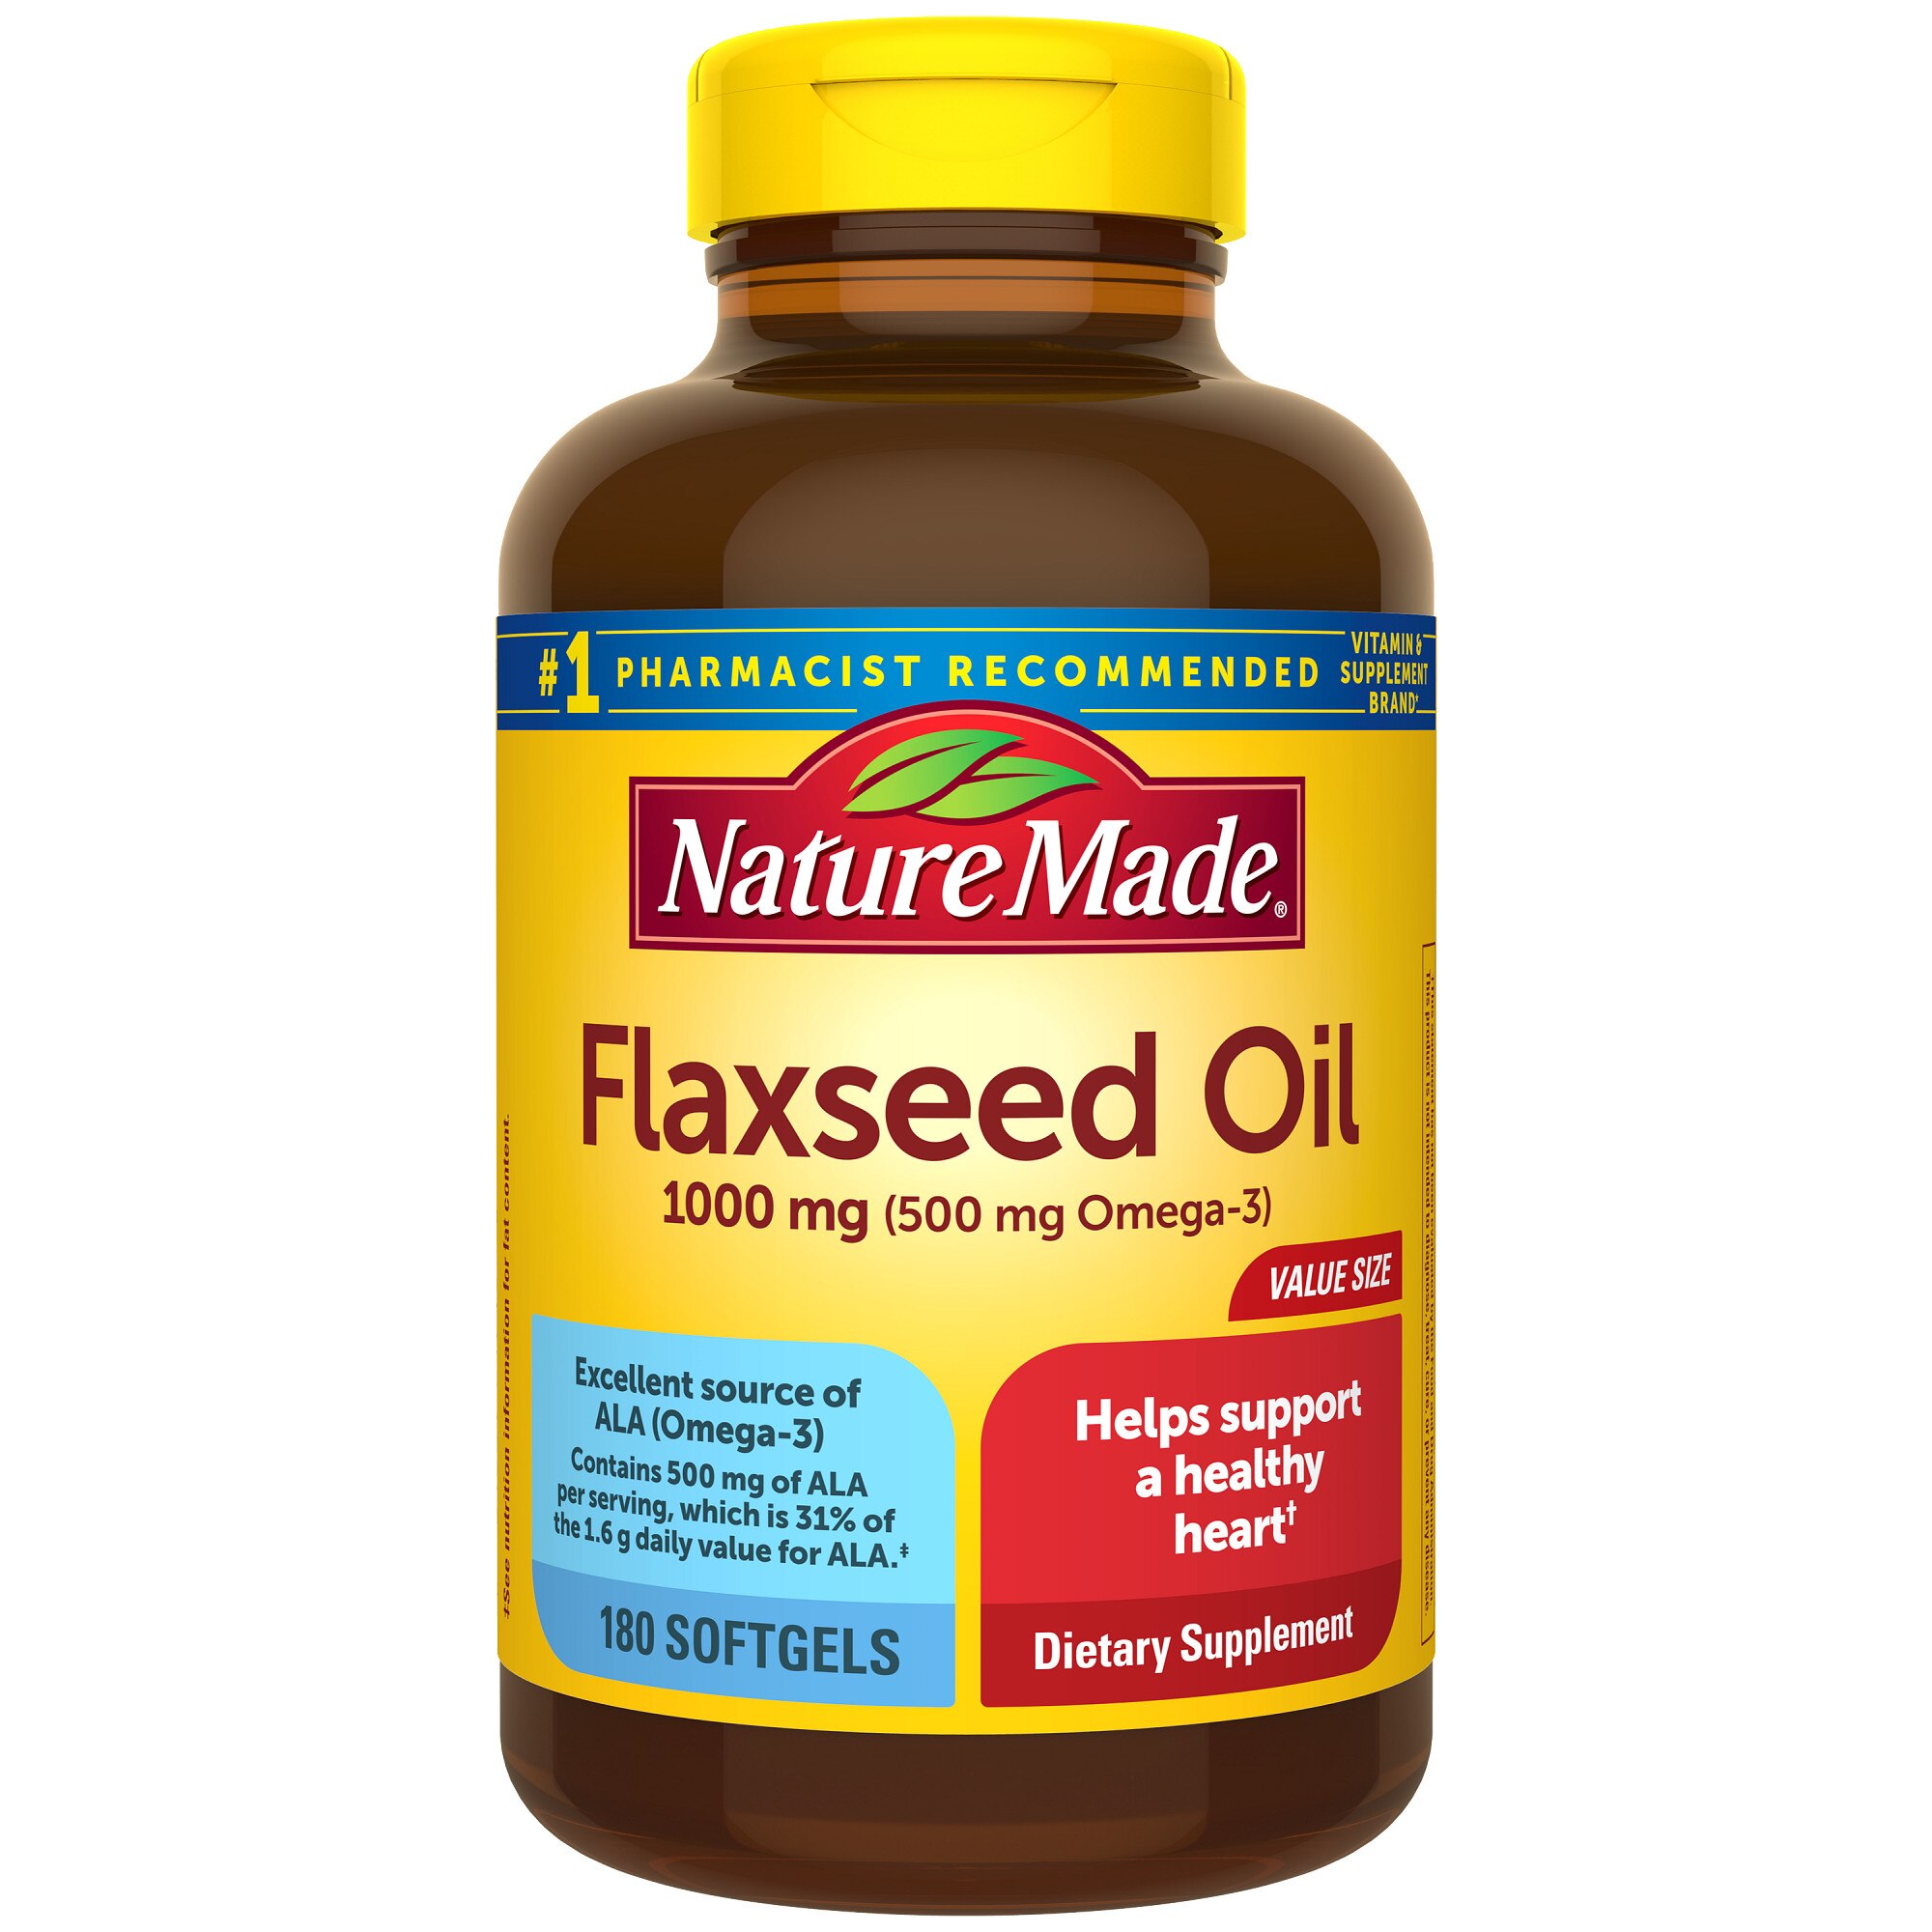 Nature Made Flaxseed Oil 1000 mg Heart Health Support Softgels, 180 CT